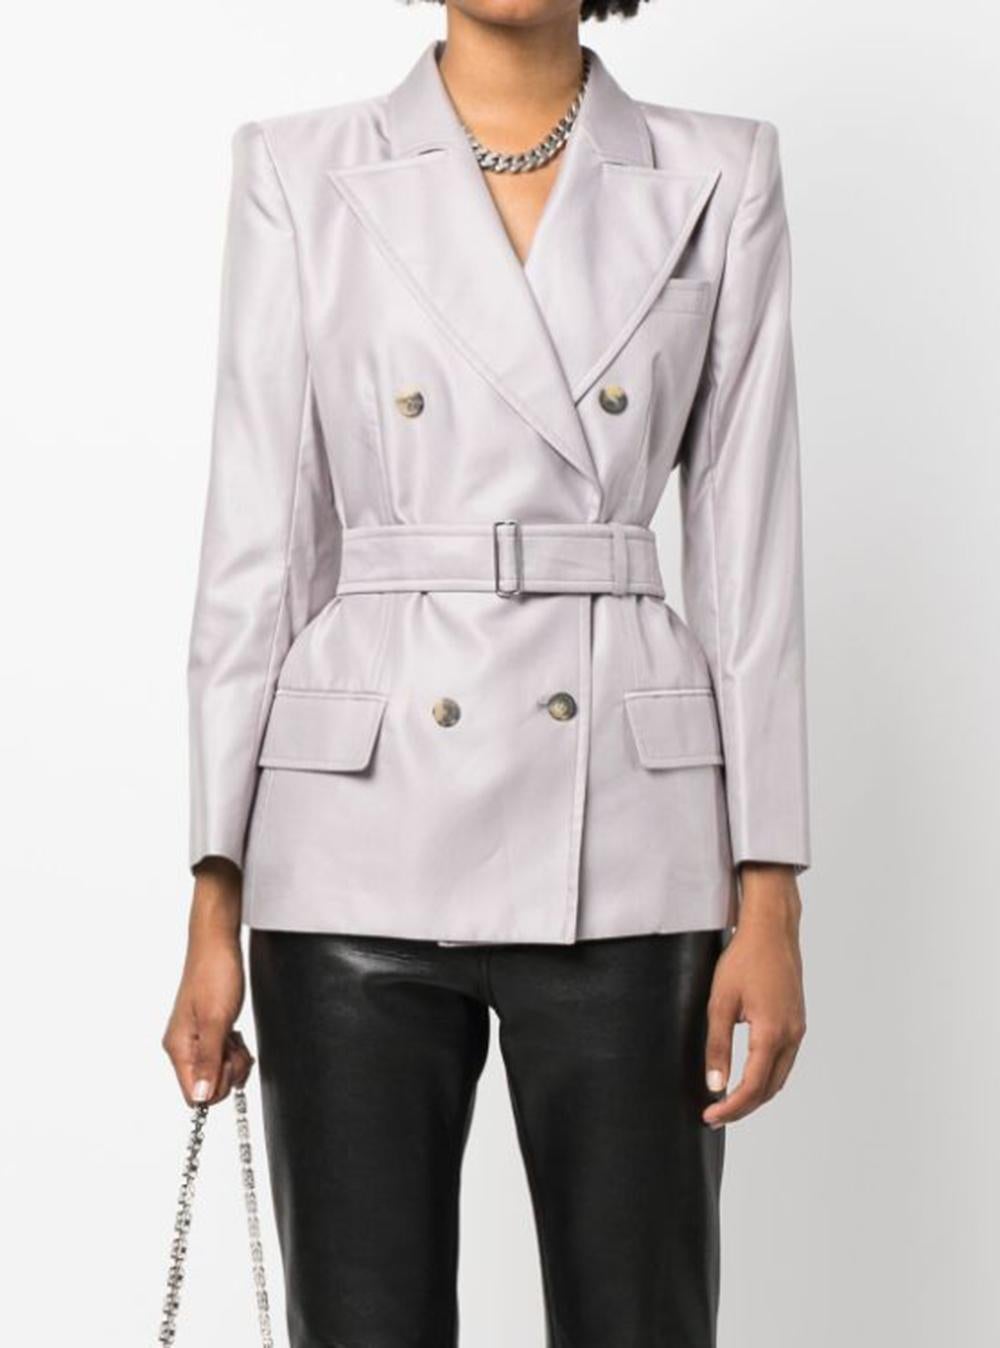 YSL Yves Saint Laurent by Tom Ford lilac cotton belted double-breasted blazer featuring peak lapels, double-breasted button fastening, long sleeves, buttoned cuffs, pocket at the chest, detachable waist belt, two front flap pockets.
Composition: